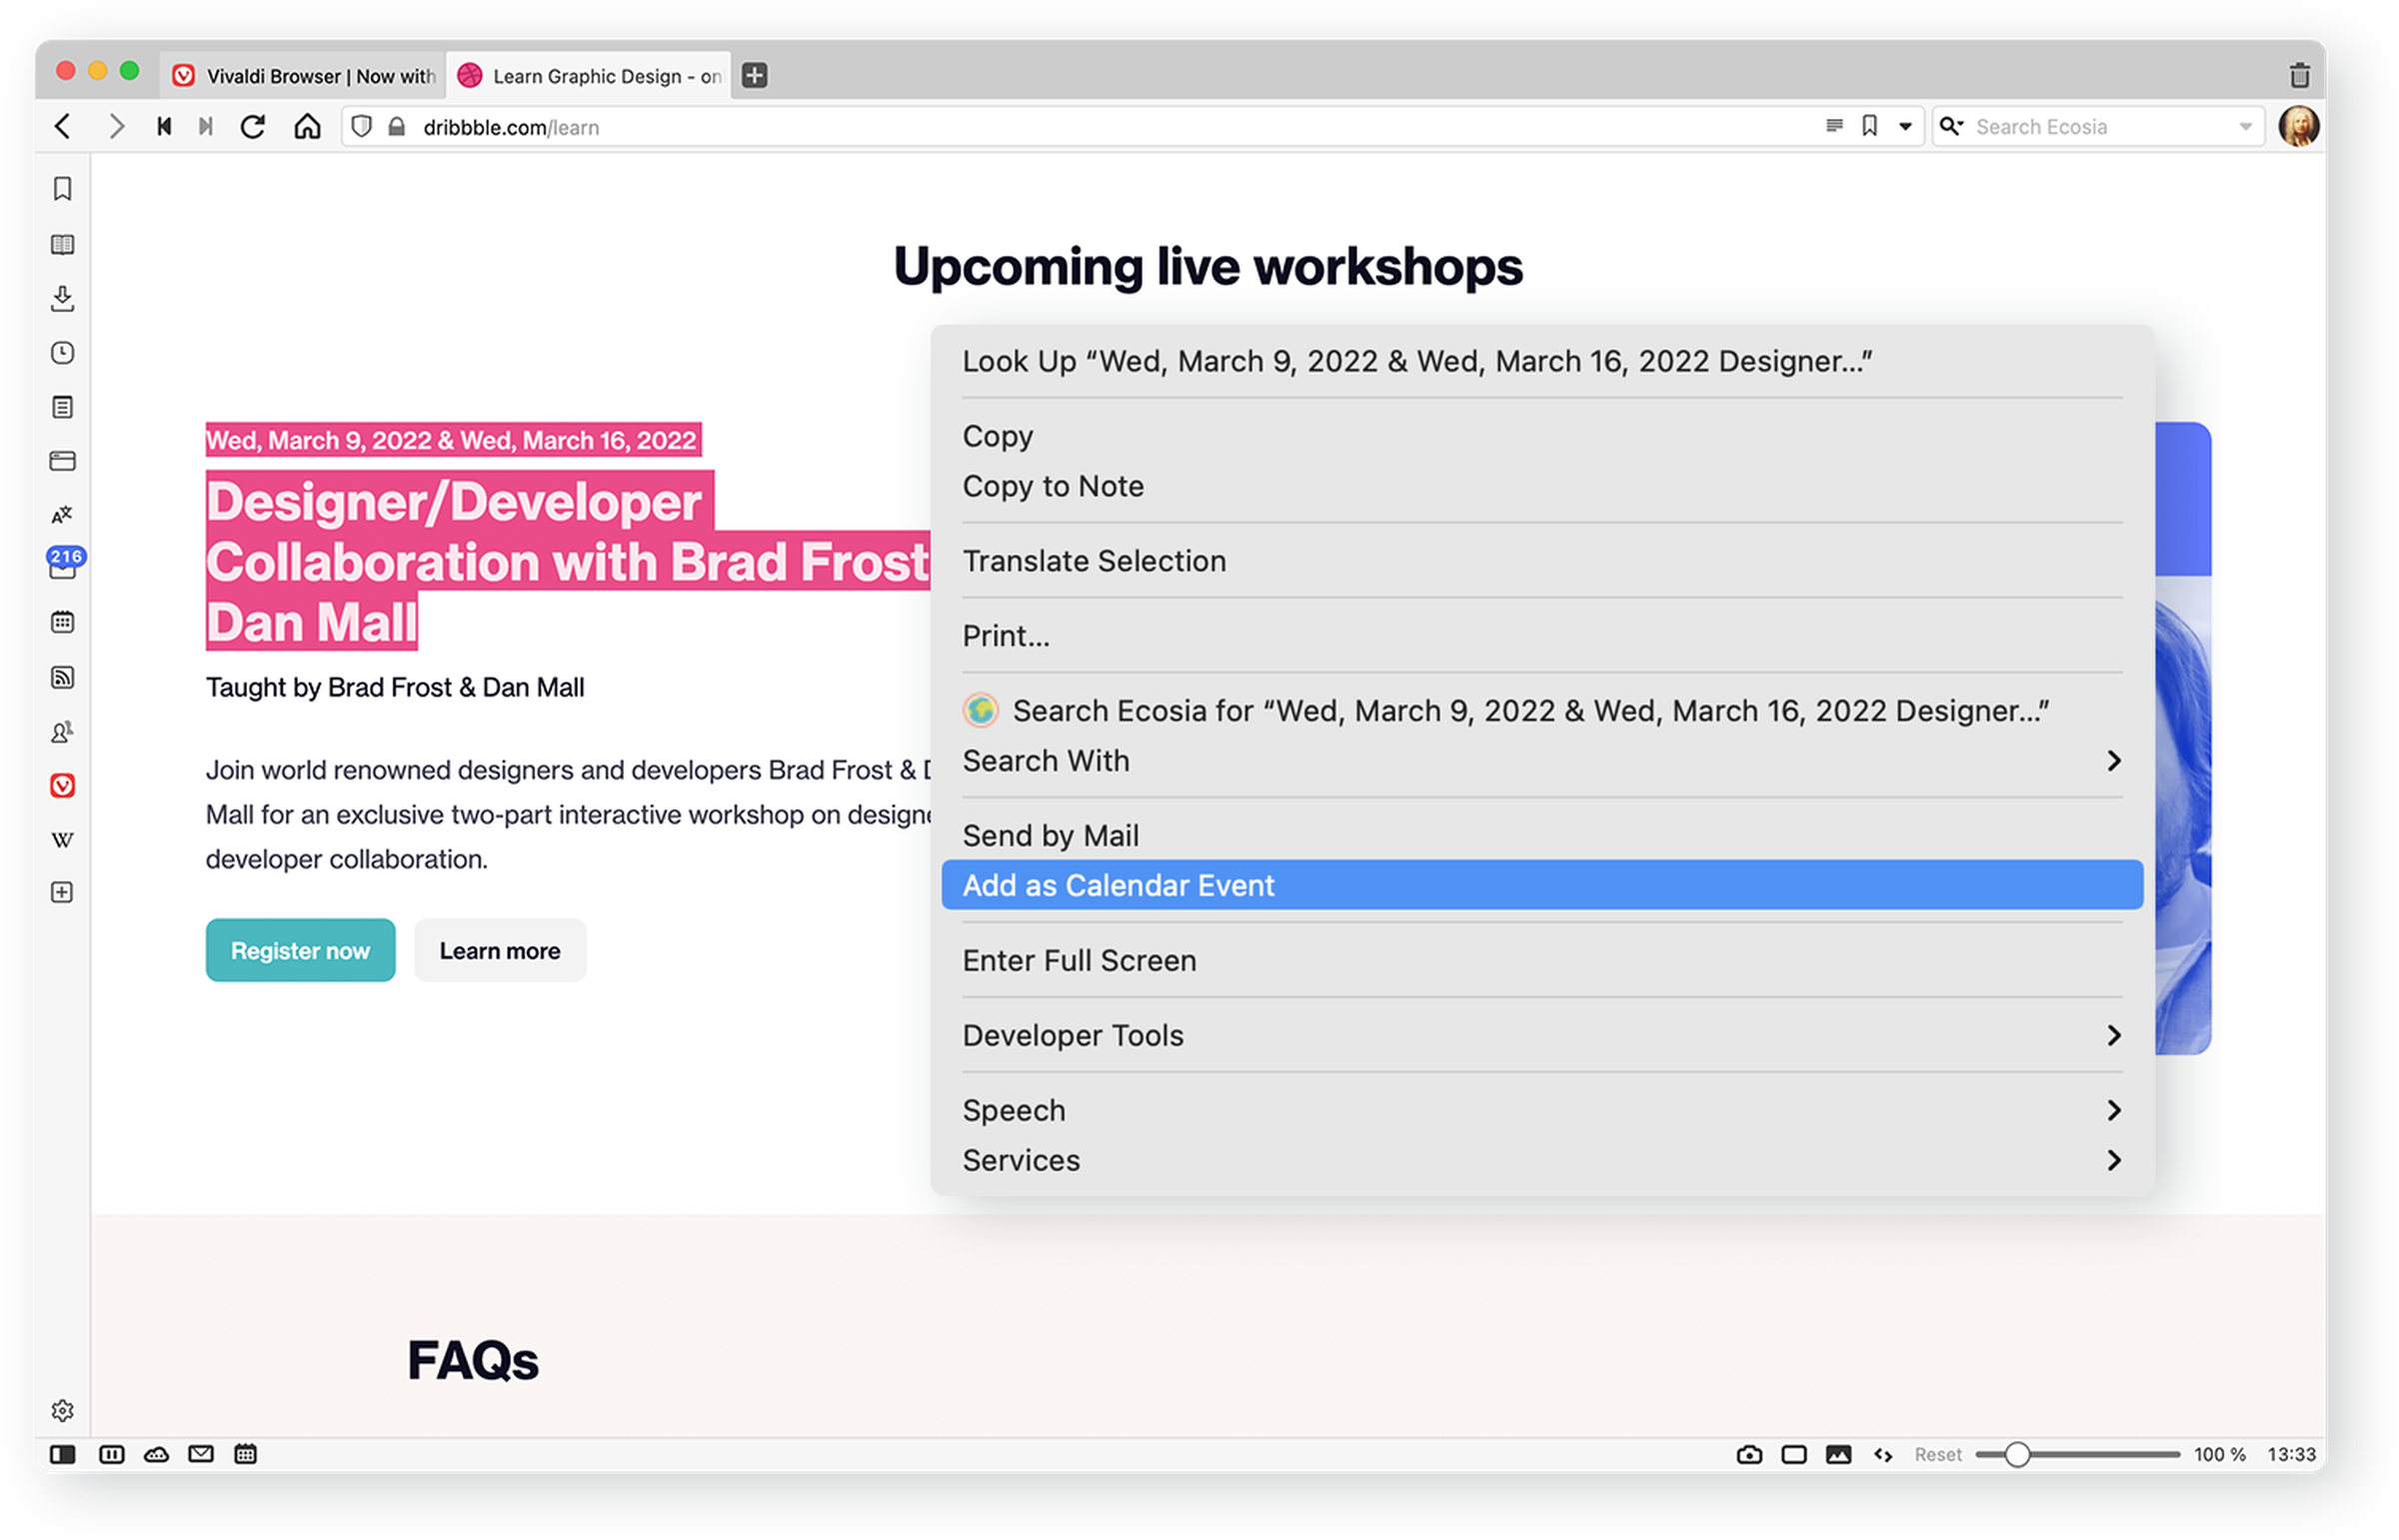 You can quickly add an event to your calendar without leaving the page.